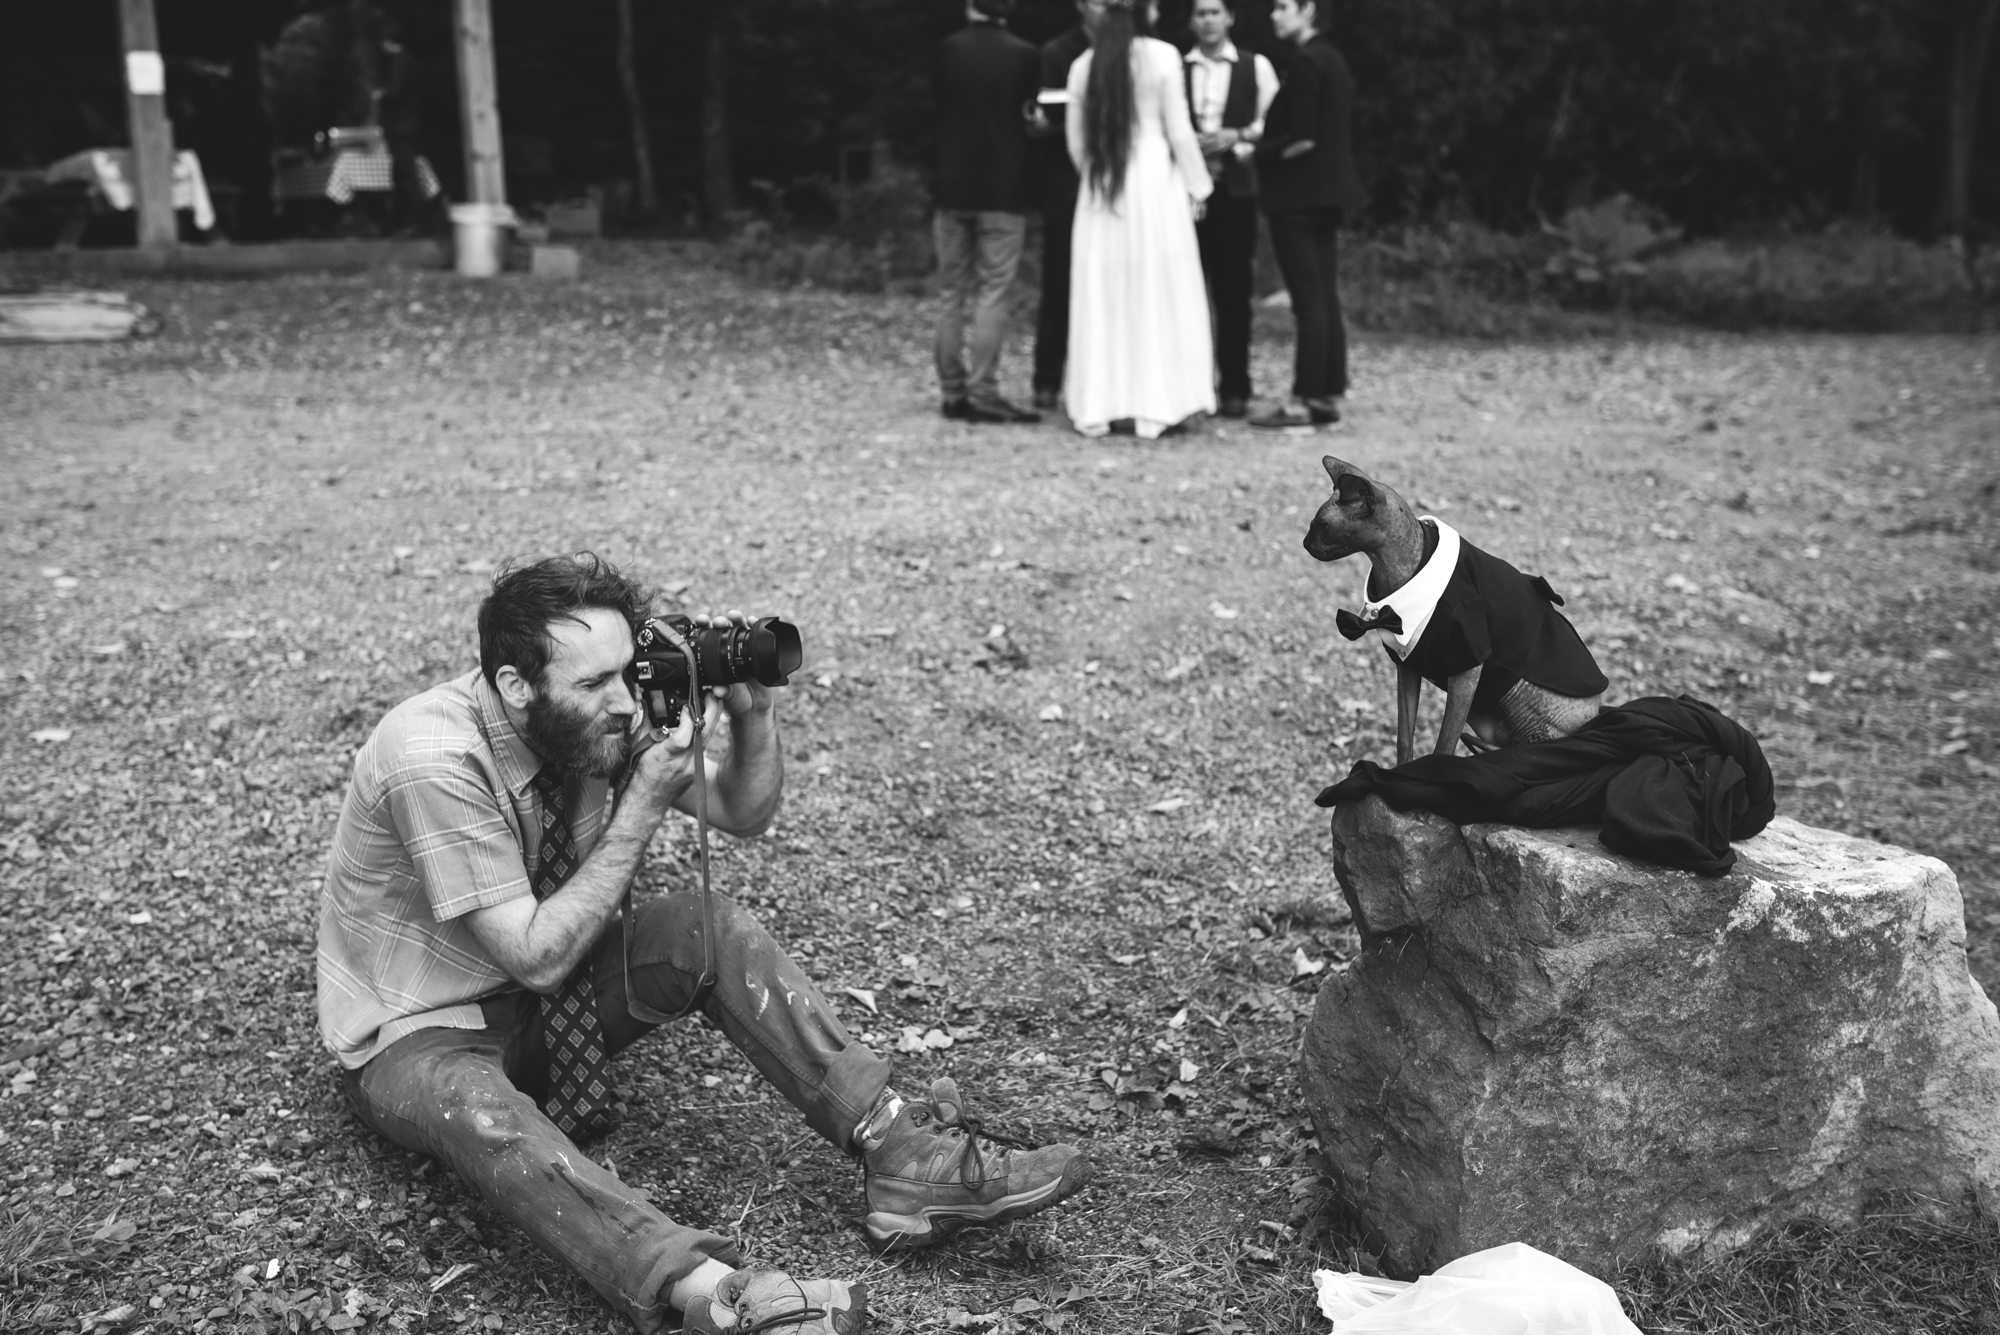  Mountain Wedding, Outdoors, Rustic, West Virginia, Maryland Wedding Photographer, DIY, Casual, Wedding Guests taking photo of cat in bowtie, Pets, Black and White Photo 